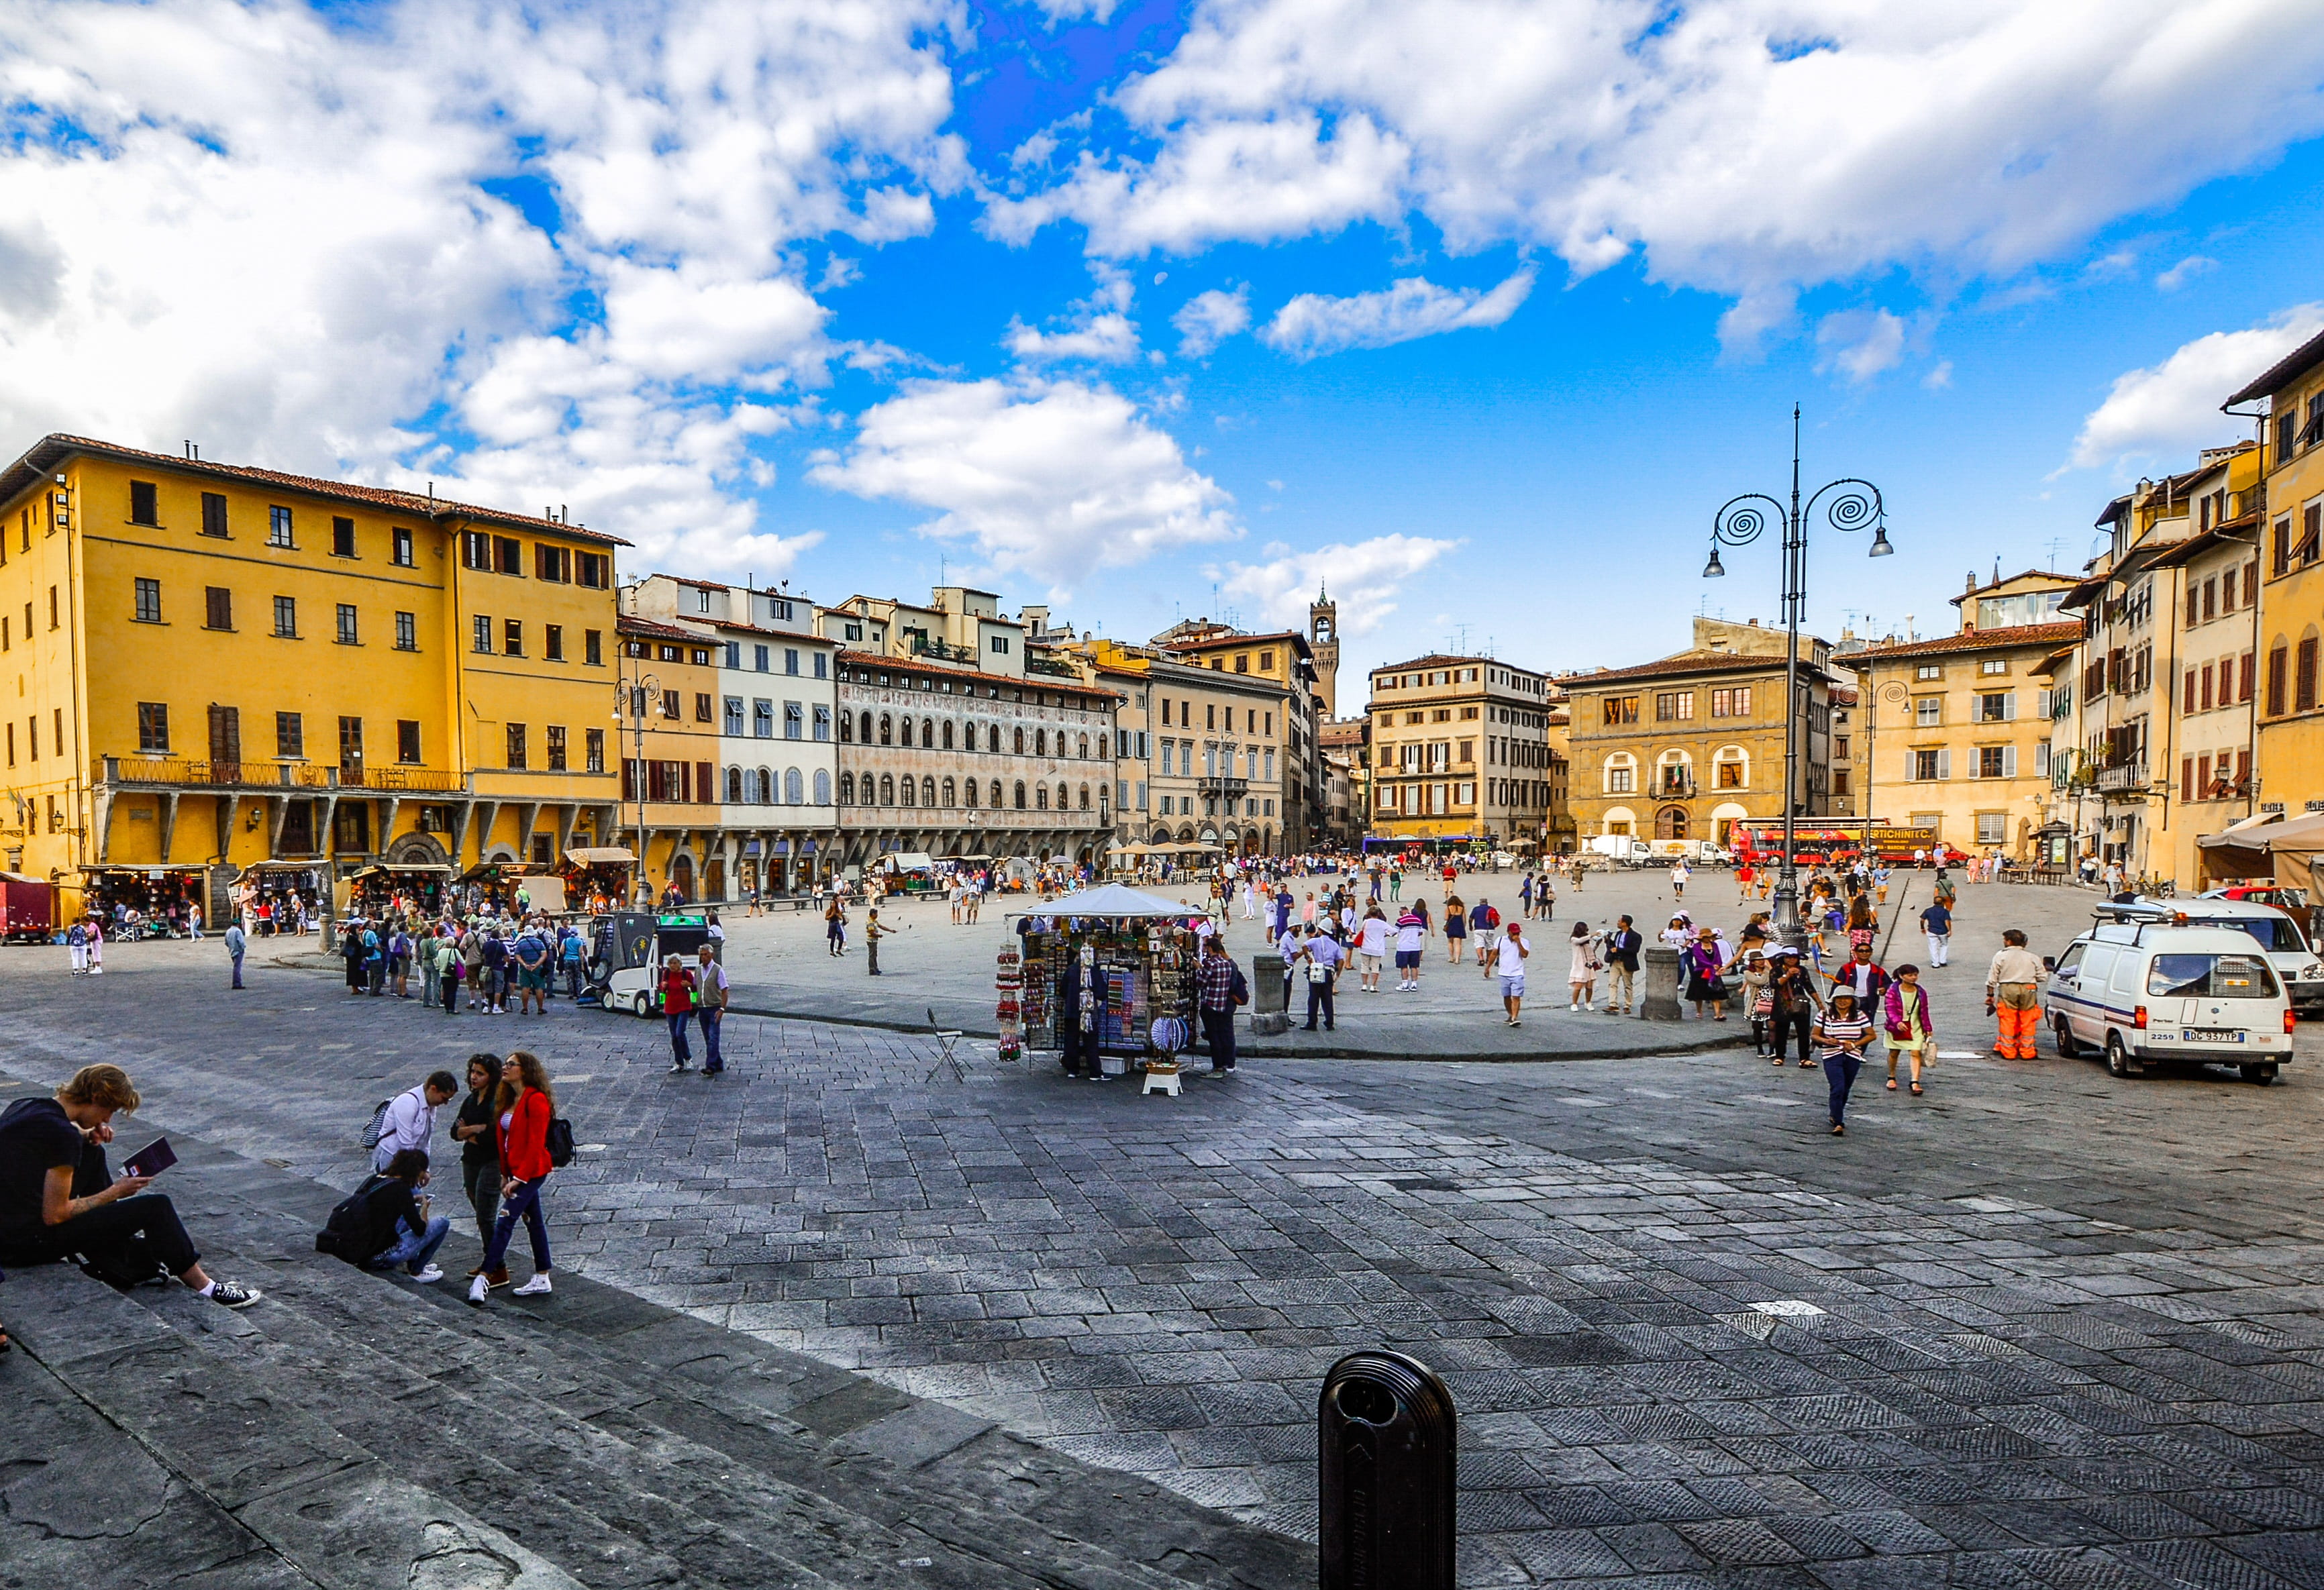 Piazza, Square, Italy, Italian, Florence, tuscany, firenze